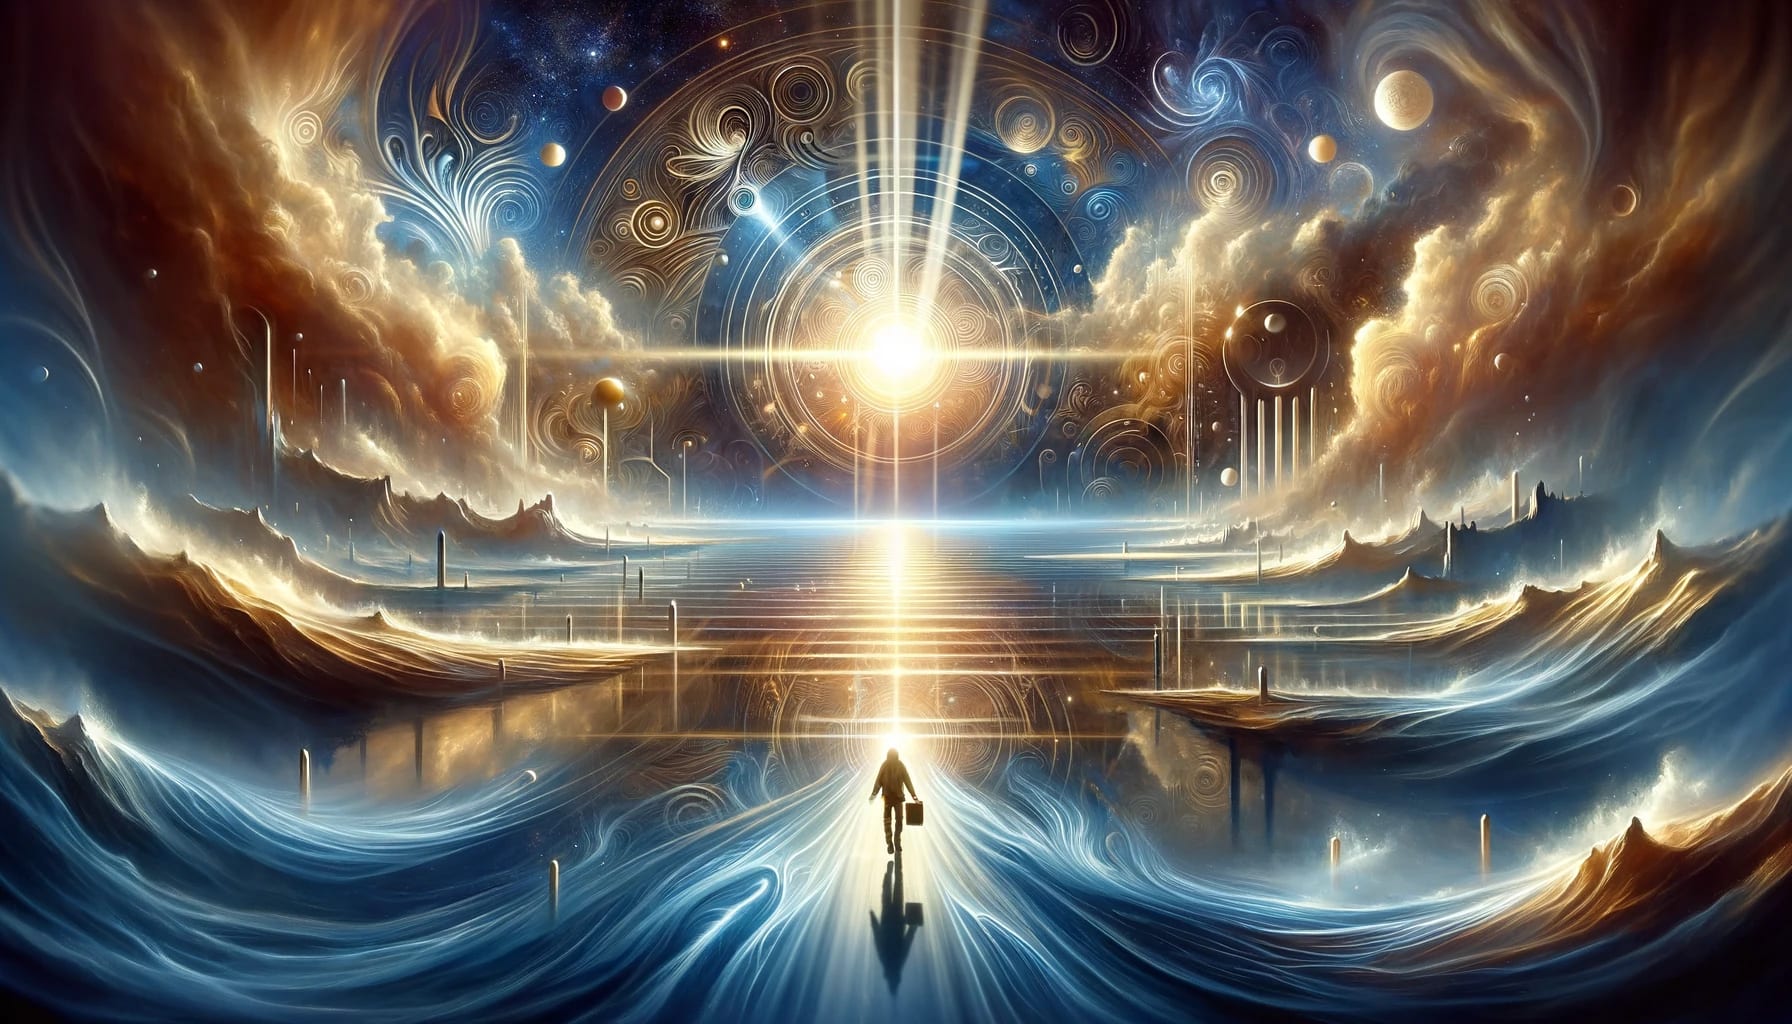 Create a wide, stylized, and abstract image depicting a person entering into a vast, open basin. The basin is symbolic of the search for moral truth, embodying themes of discovery, enlightenment, and the journey of the soul. The landscape should evoke a sense of wonder and mystery, with elements such as ethereal light beams, reflective waters, and enigmatic symbols scattered throughout. The figure is portrayed as a small, solitary explorer, emphasizing the grandeur of their quest and the vastness of the basin. The overall aesthetic should blend surrealism with elements of fantasy, creating a dreamlike atmosphere that captures the profound and transcendental nature of the search for moral truth.